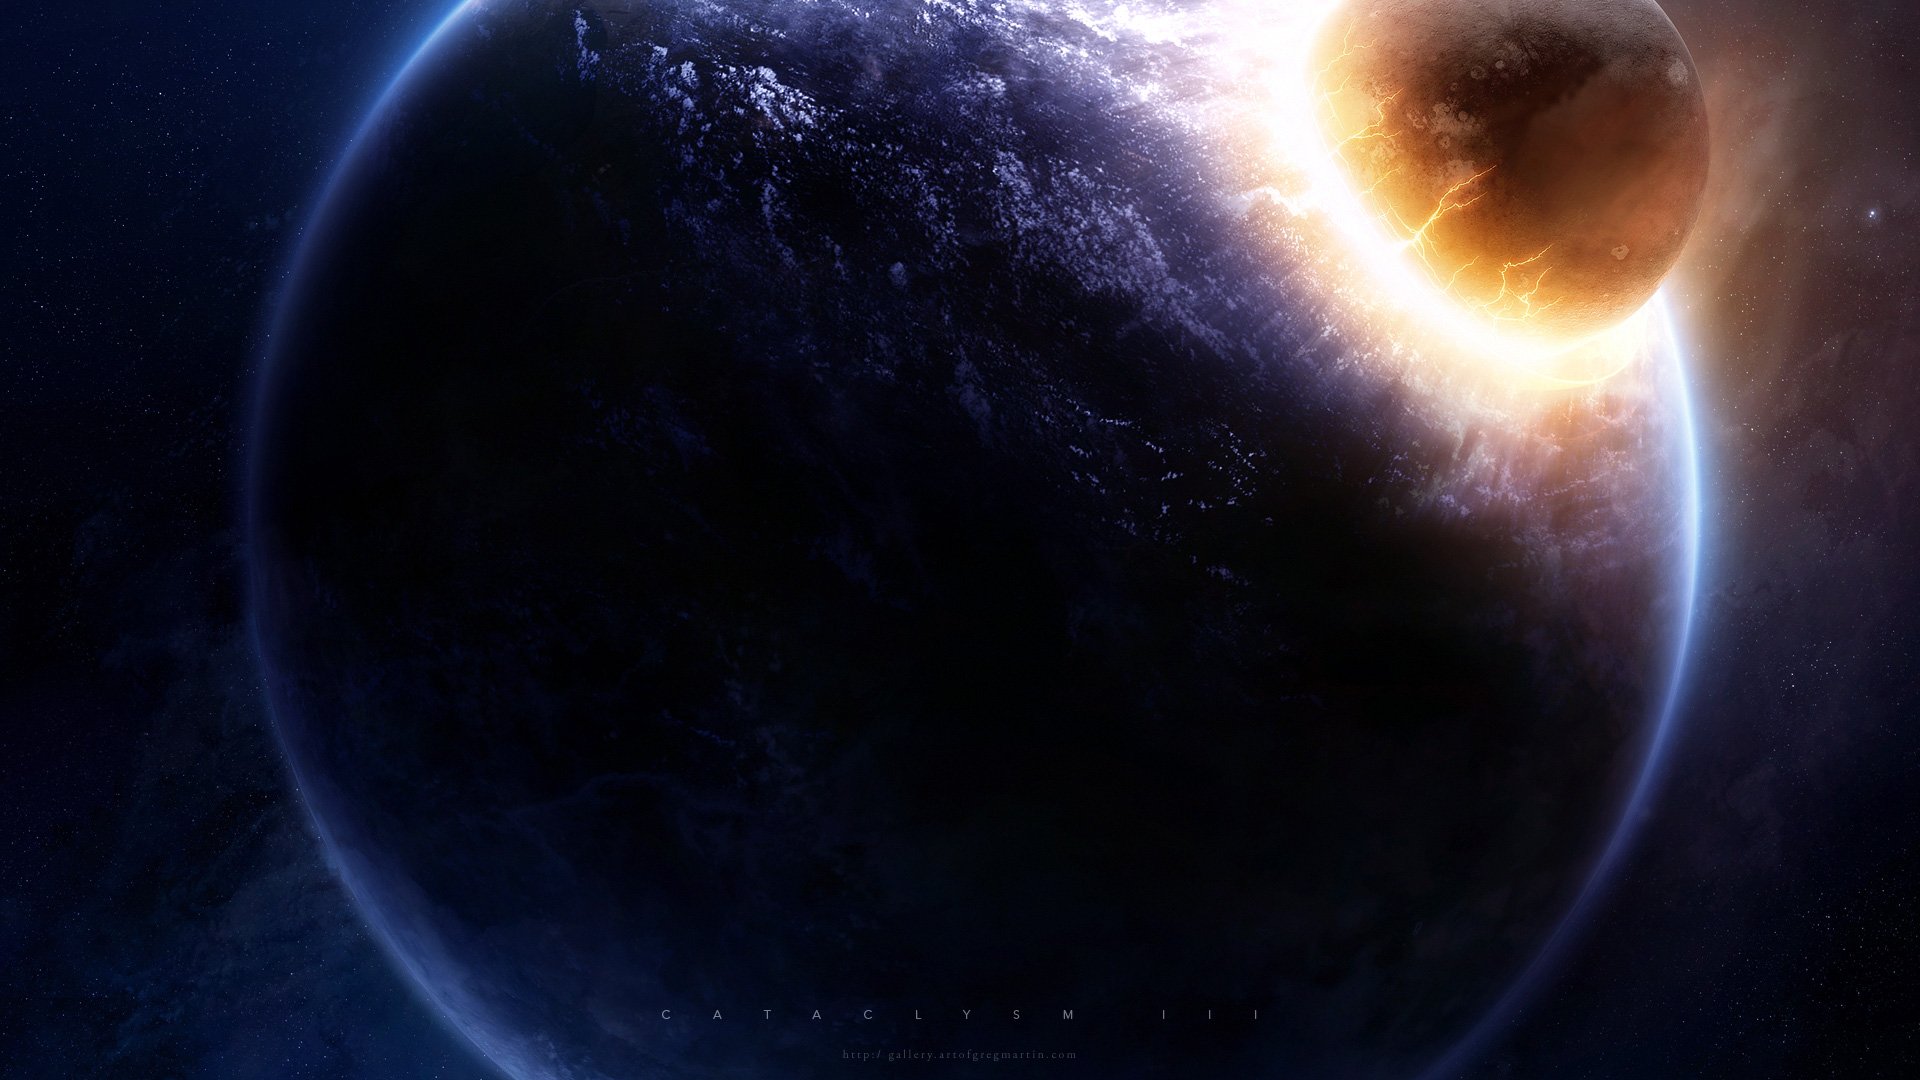 outer, Space, Stars, Explosions, Planets, Cataclysm, Greg, Martin Wallpaper